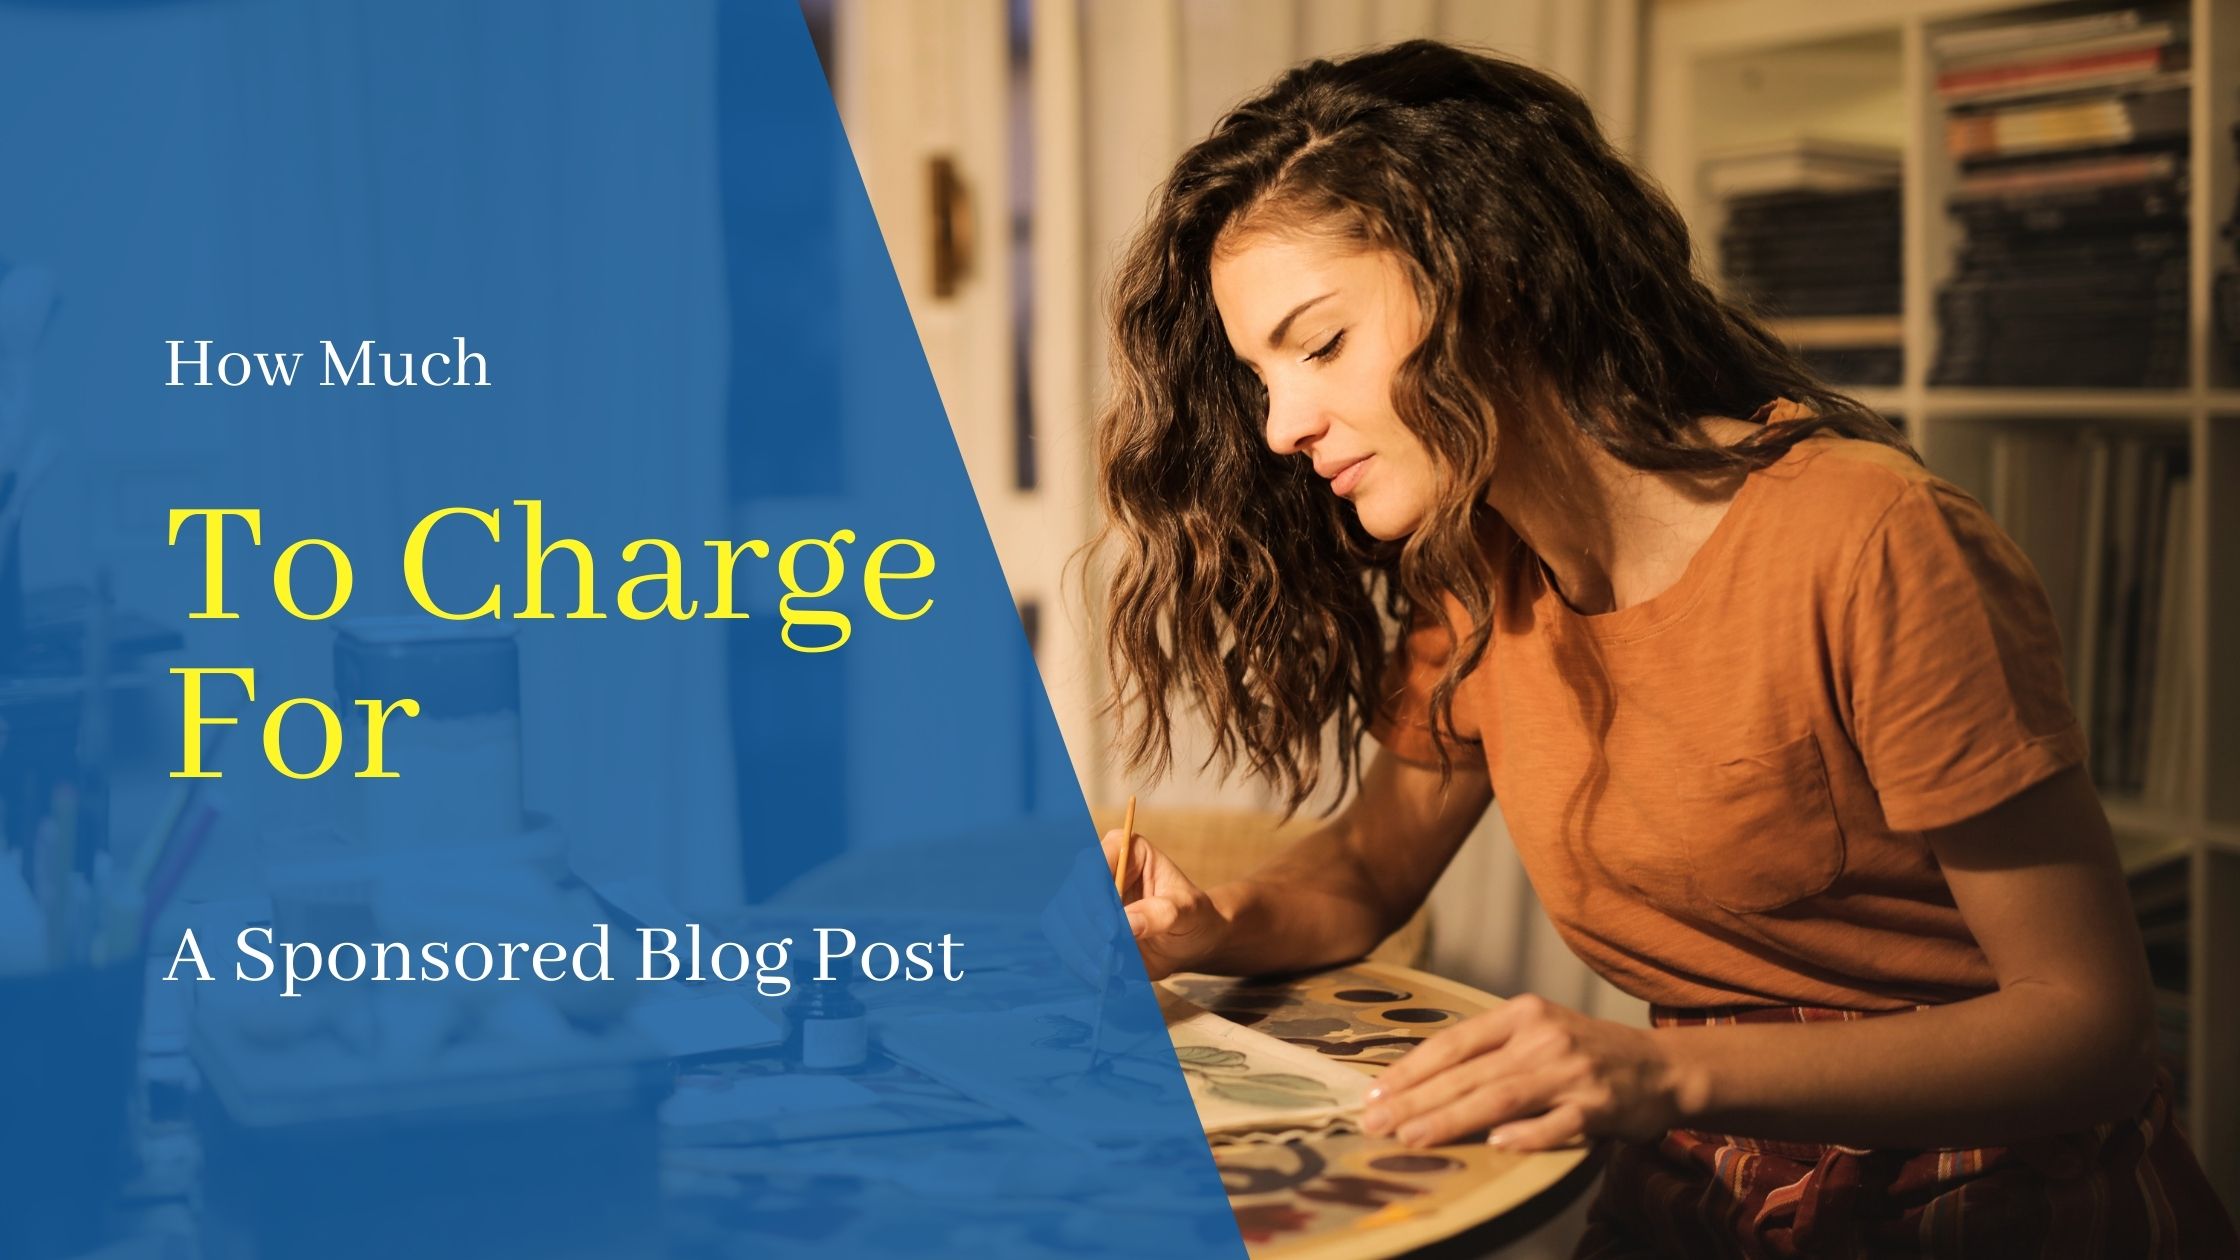 How Much To Charge For A Sponsored Blog Post